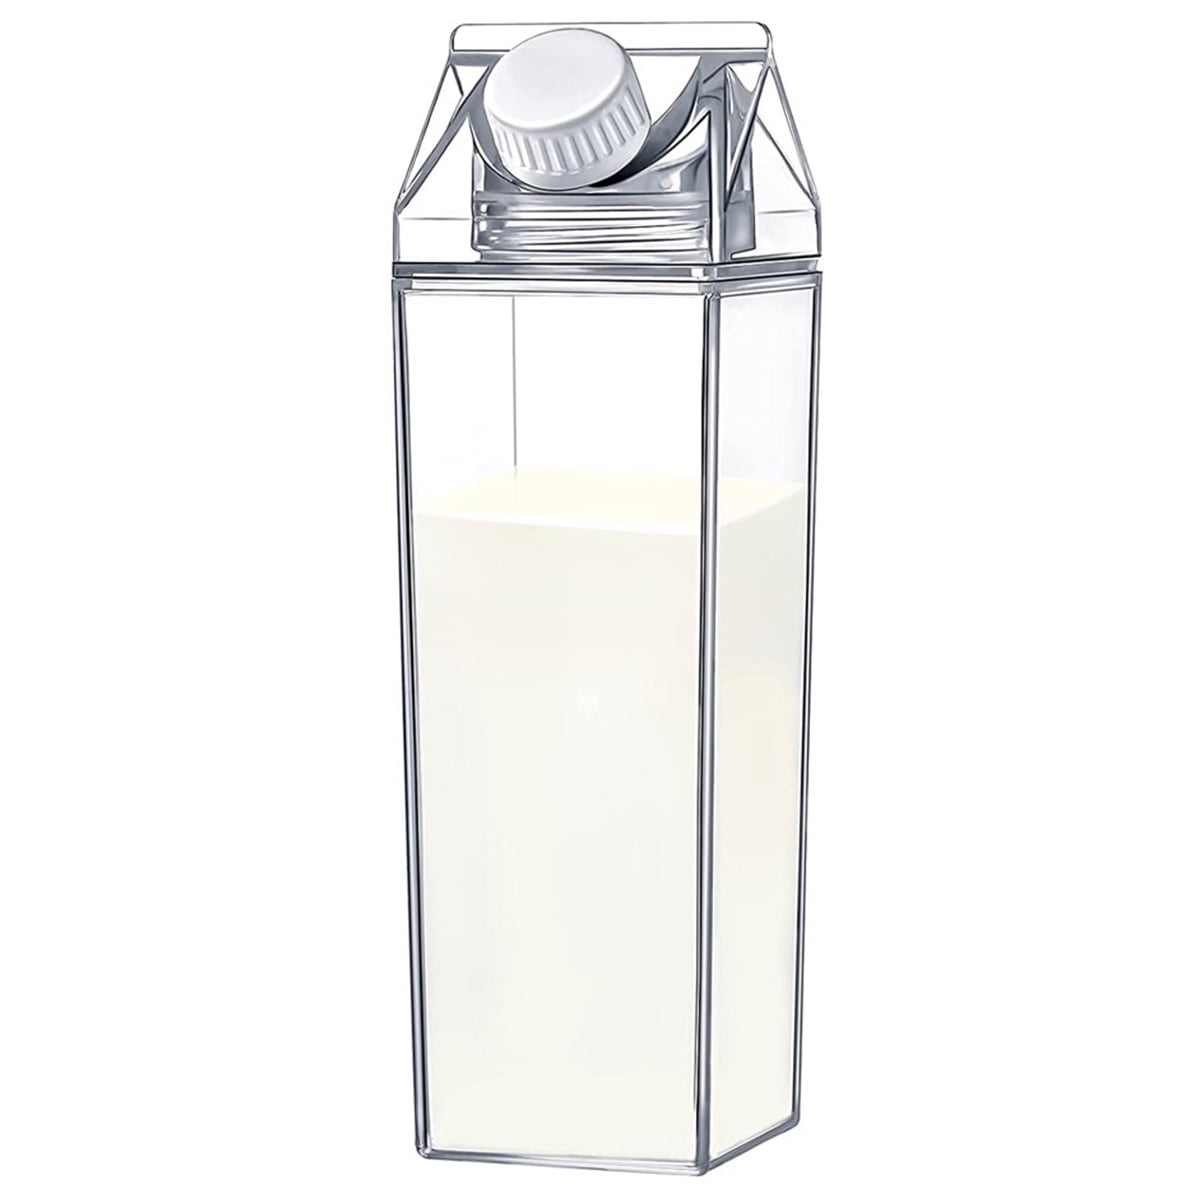 Lieonvis 500Ml/1000Ml Clear Milk Carton Water Bottle Leak-proof Milk Box  Water Bottle with 2 Spouts Portable Reusable Milk Bottles Water Juice Tea  Container for Travel Sports Camping Use 